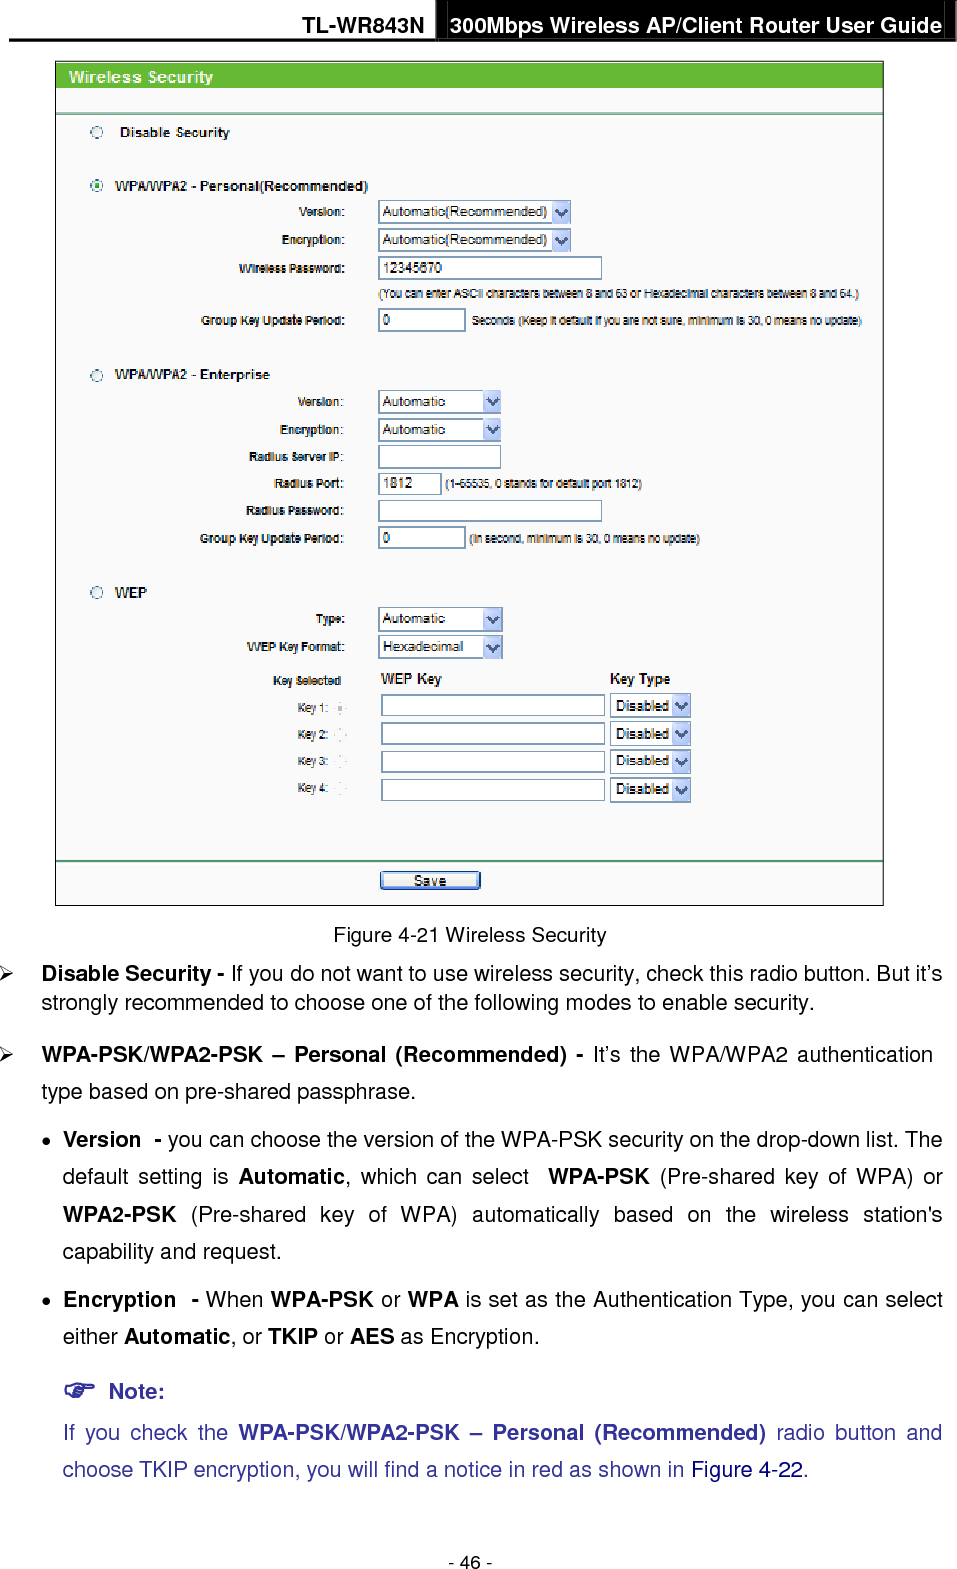 TL-WR843N 300Mbps Wireless AP/Client Router User Guide - 46 - Figure 4-21 Wireless Security Disable Security - If you do not want to use wireless security, check this radio button. But it’sstrongly recommended to choose one of the following modes to enable security.WPA-PSK/WPA2-PSK – Personal (Recommended) - It’s the WPA/WPA2 authenticationtype based on pre-shared passphrase.•Version - you can choose the version of the WPA-PSK security on the drop-down list. Thedefault setting is Automatic, which can select WPA-PSK  (Pre-shared key of WPA) orWPA2-PSK  (Pre-shared key of WPA)  automatically based on the wireless station&apos;scapability and request.•Encryption - When WPA-PSK or WPA is set as the Authentication Type, you can selecteither Automatic, or TKIP or AES as Encryption. Note:If you check the WPA-PSK/WPA2-PSK – Personal (Recommended) radio button andchoose TKIP encryption, you will find a notice in red as shown in Figure 4-22.